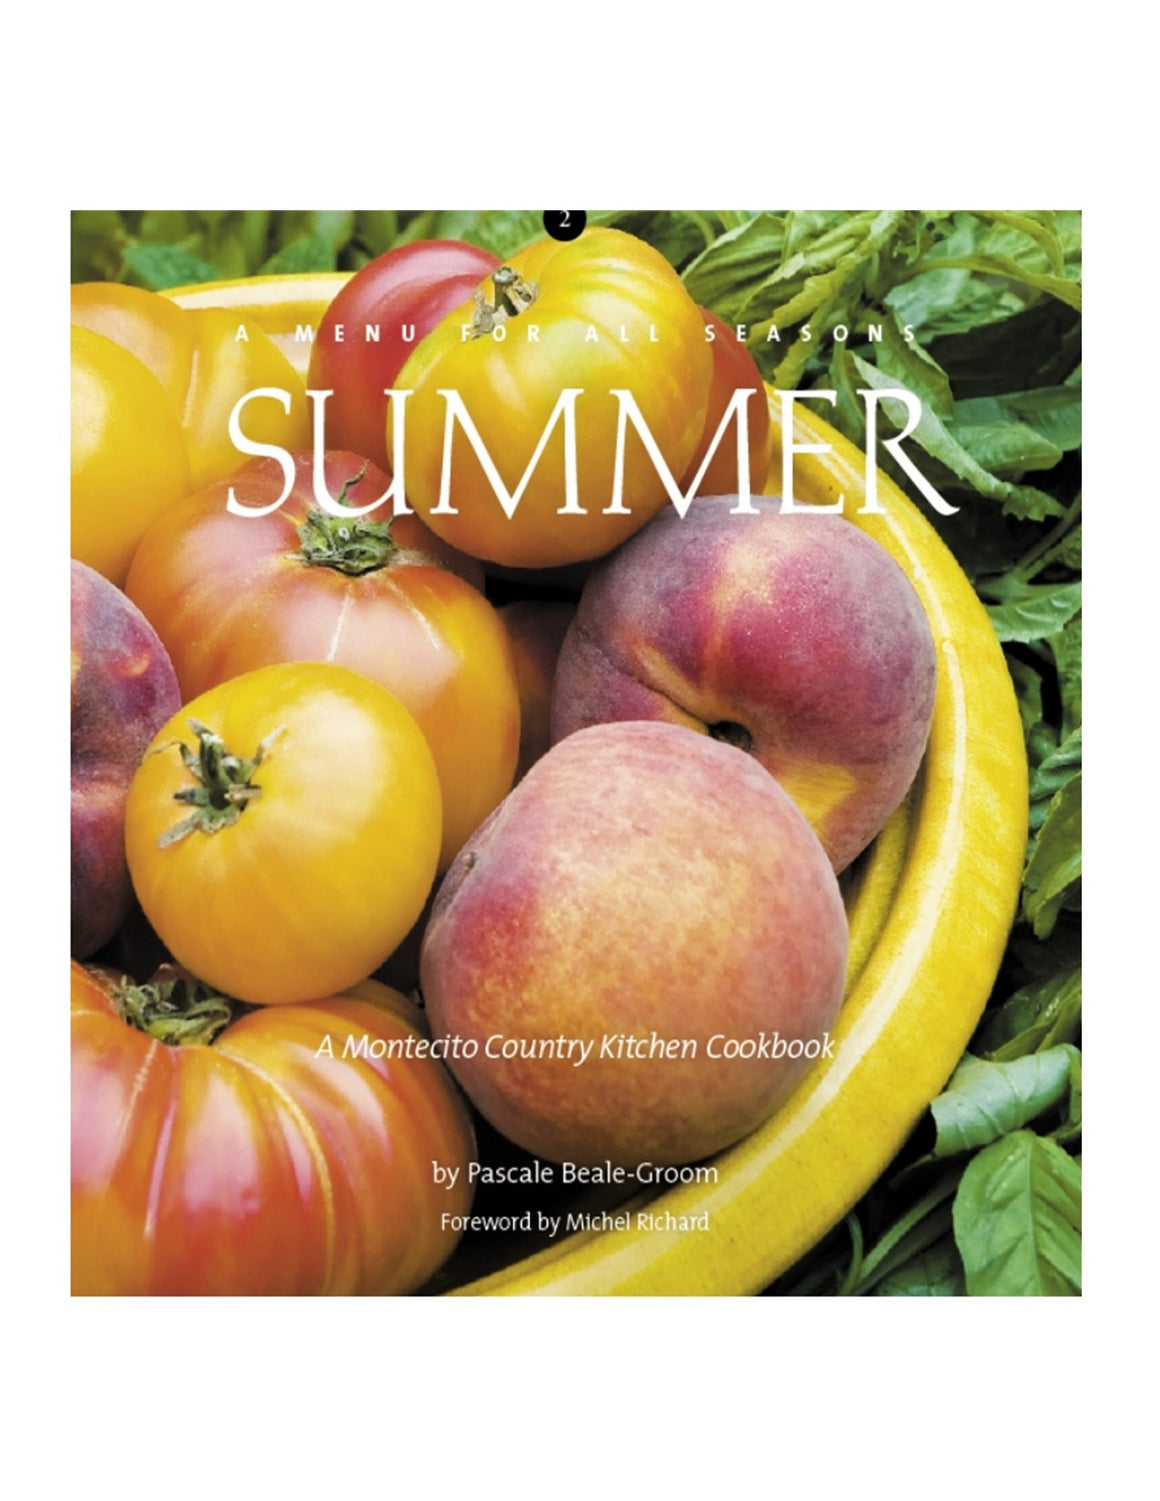 Pascales Kitchen Cook Books - A Menu For All Seasons: Summer